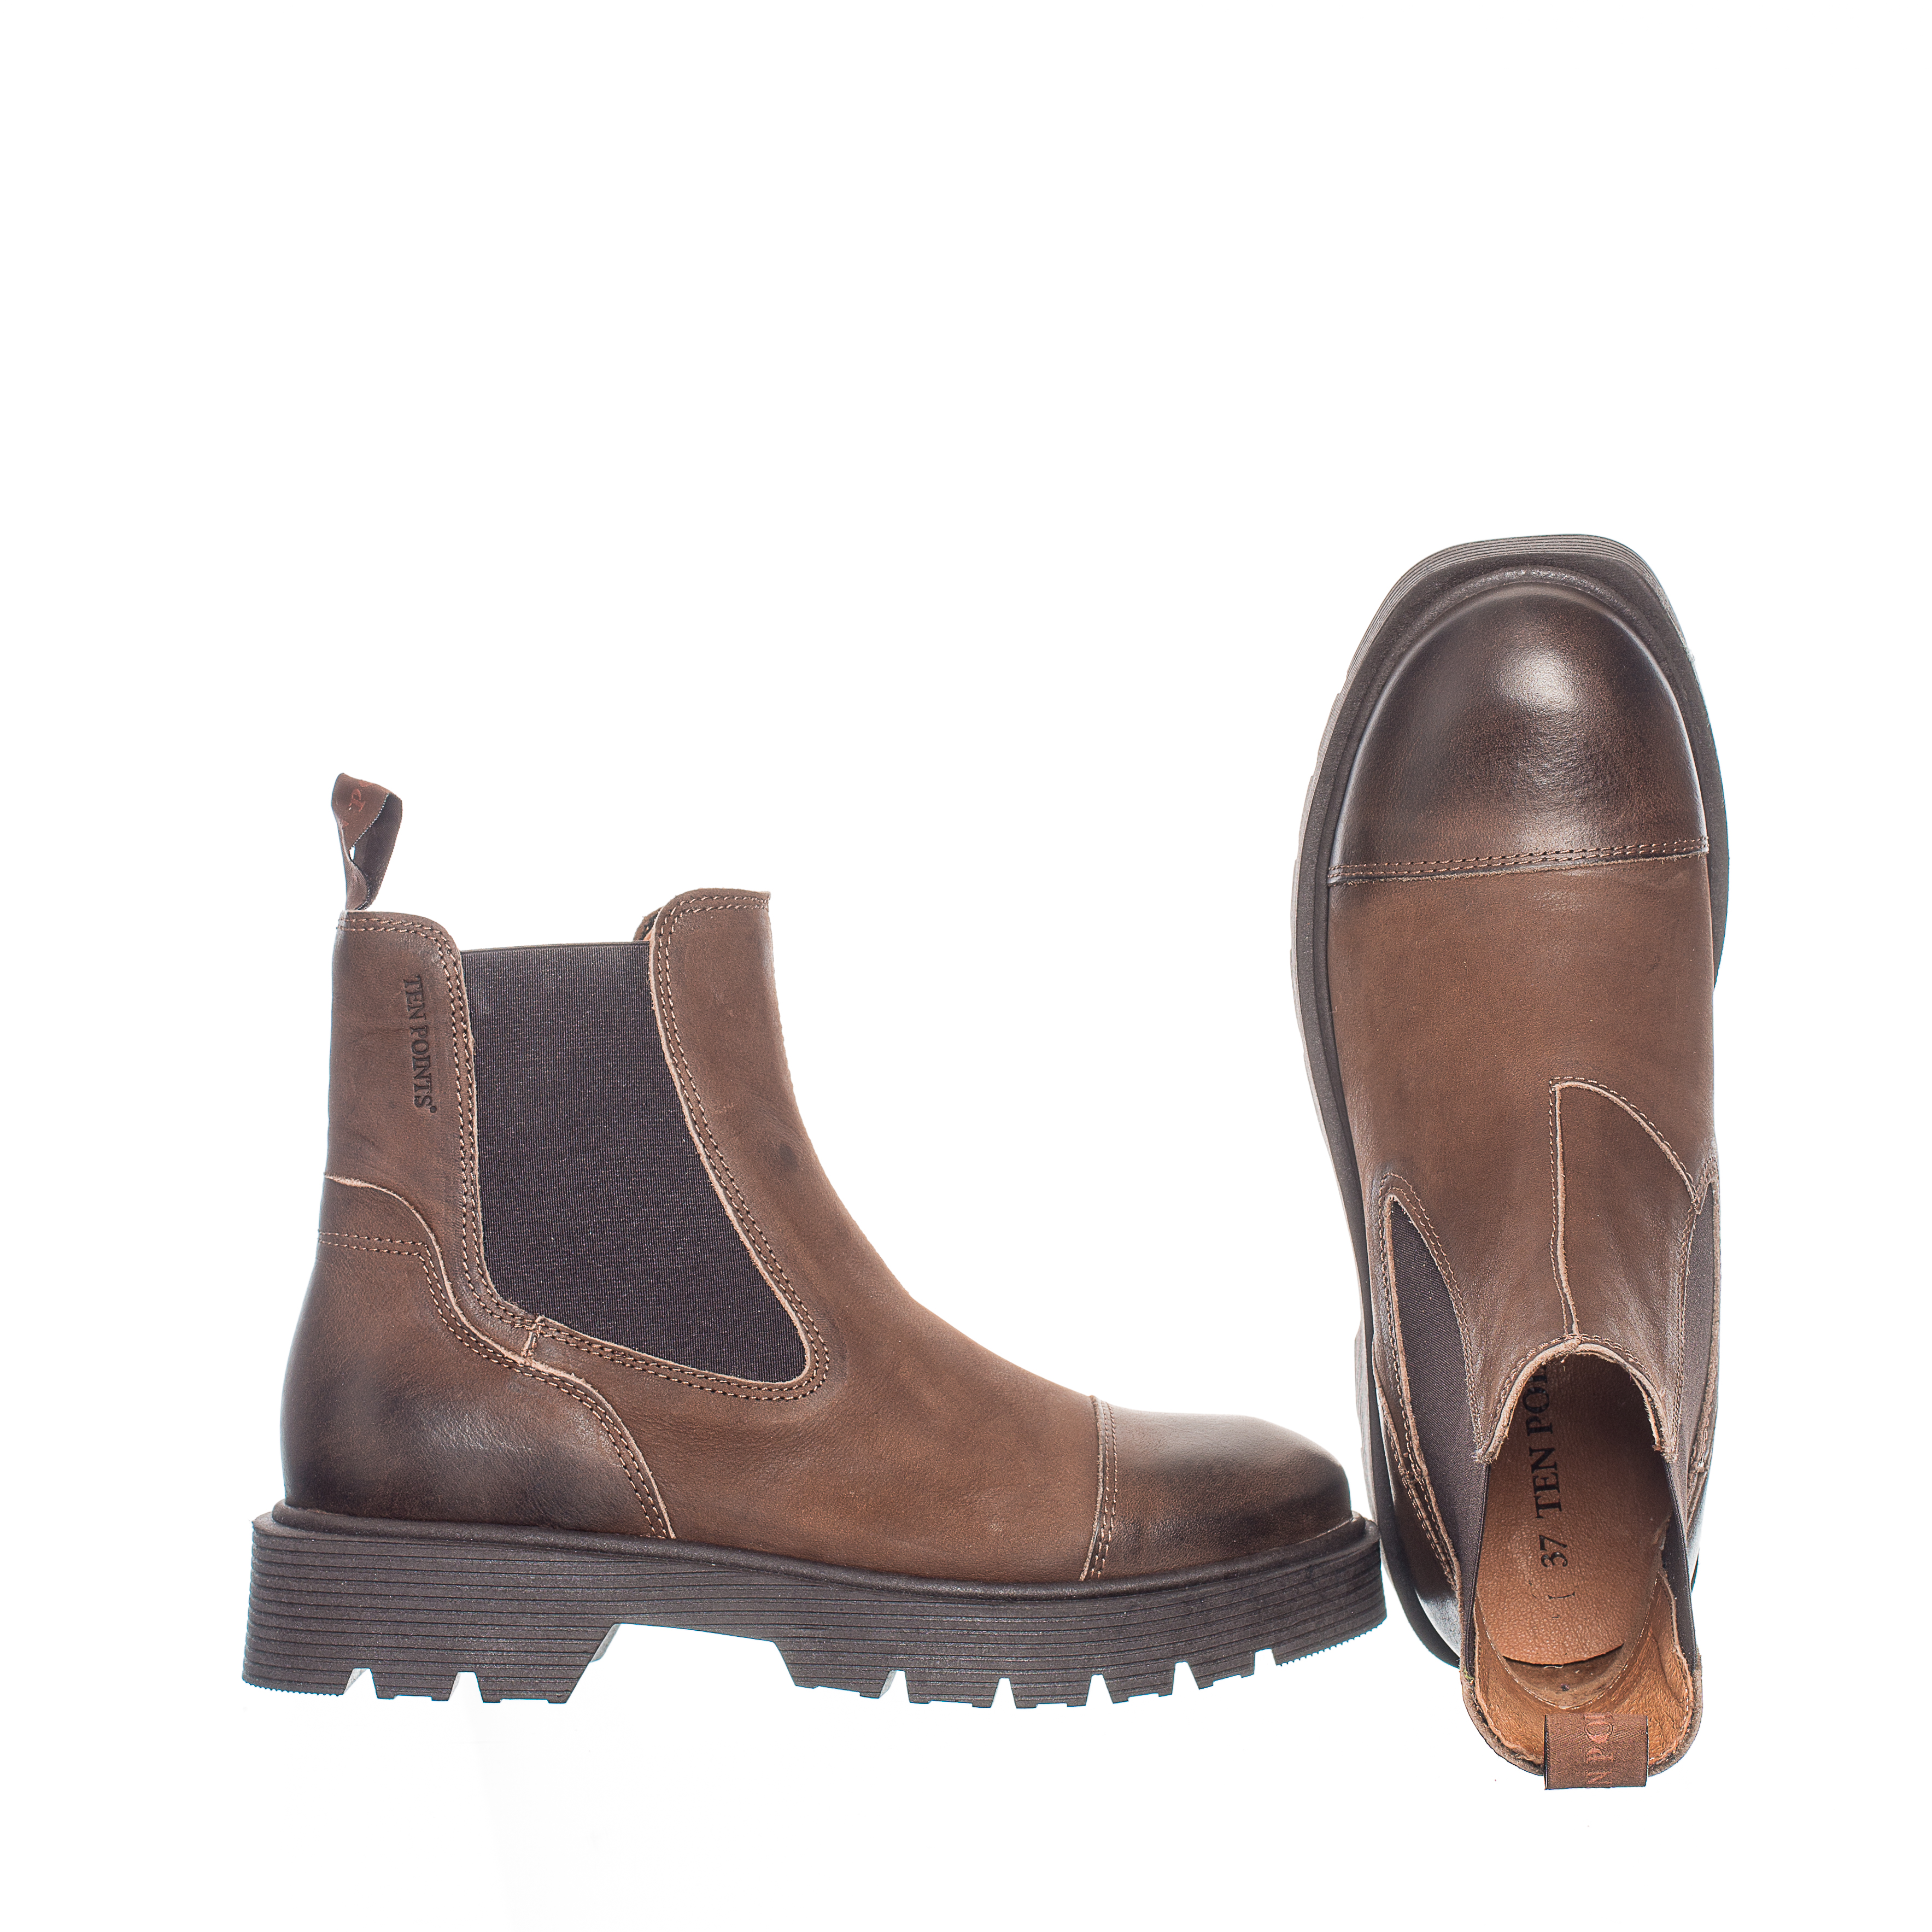 Damen Chelseaboots Mimmi Nutbrown